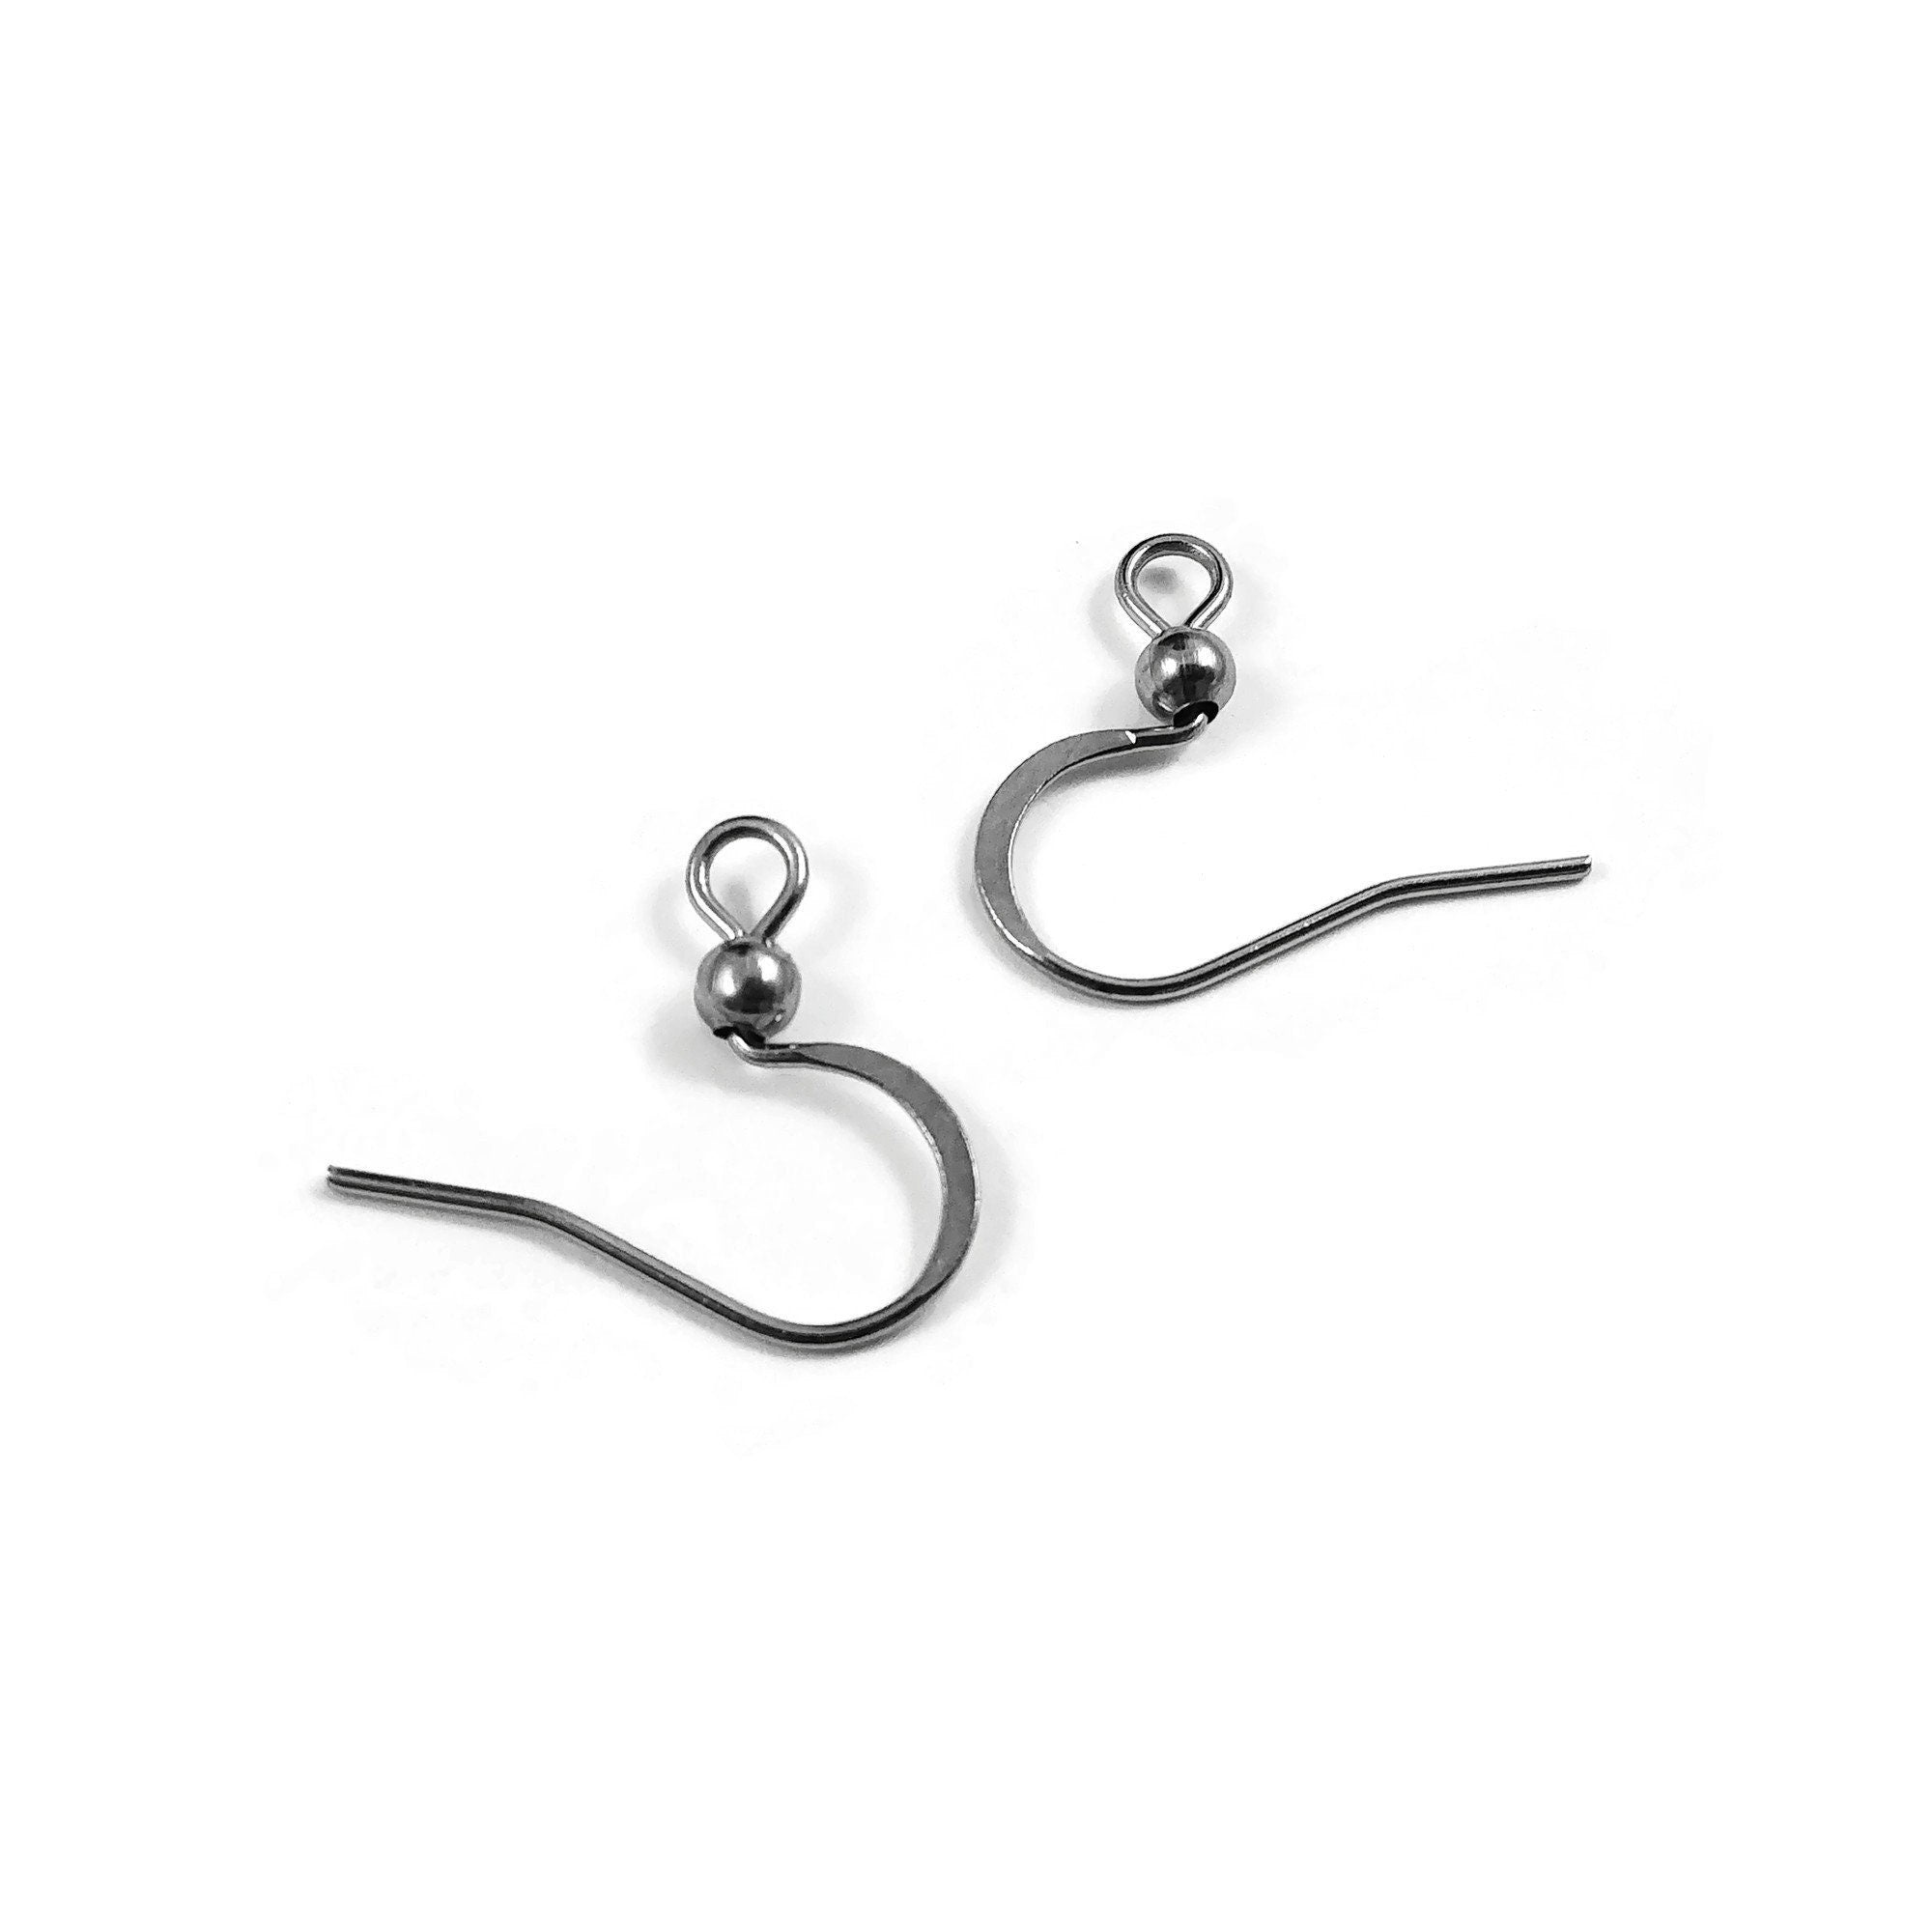 B-3 GOLD Stainless Steel Earring wires 316L stainless steel 25 pairs/ –  Campbells and Chaos